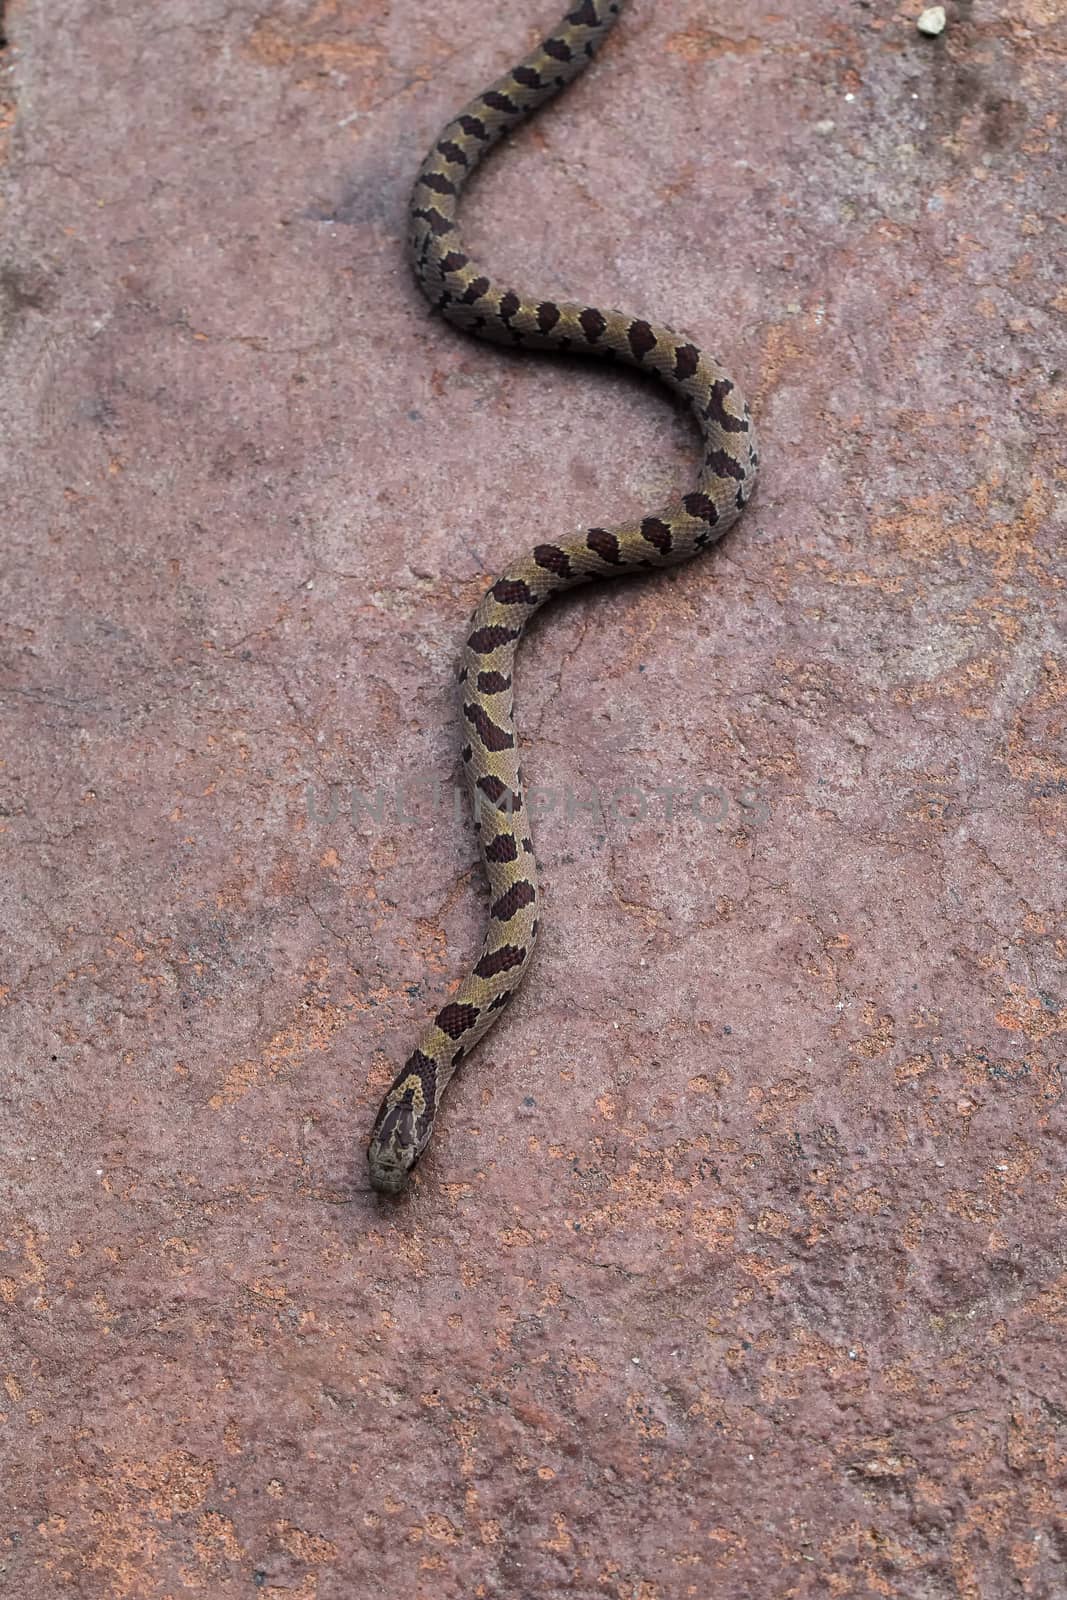 A non-poisonous brown water snake moves in a serpentine path across a stone patio.